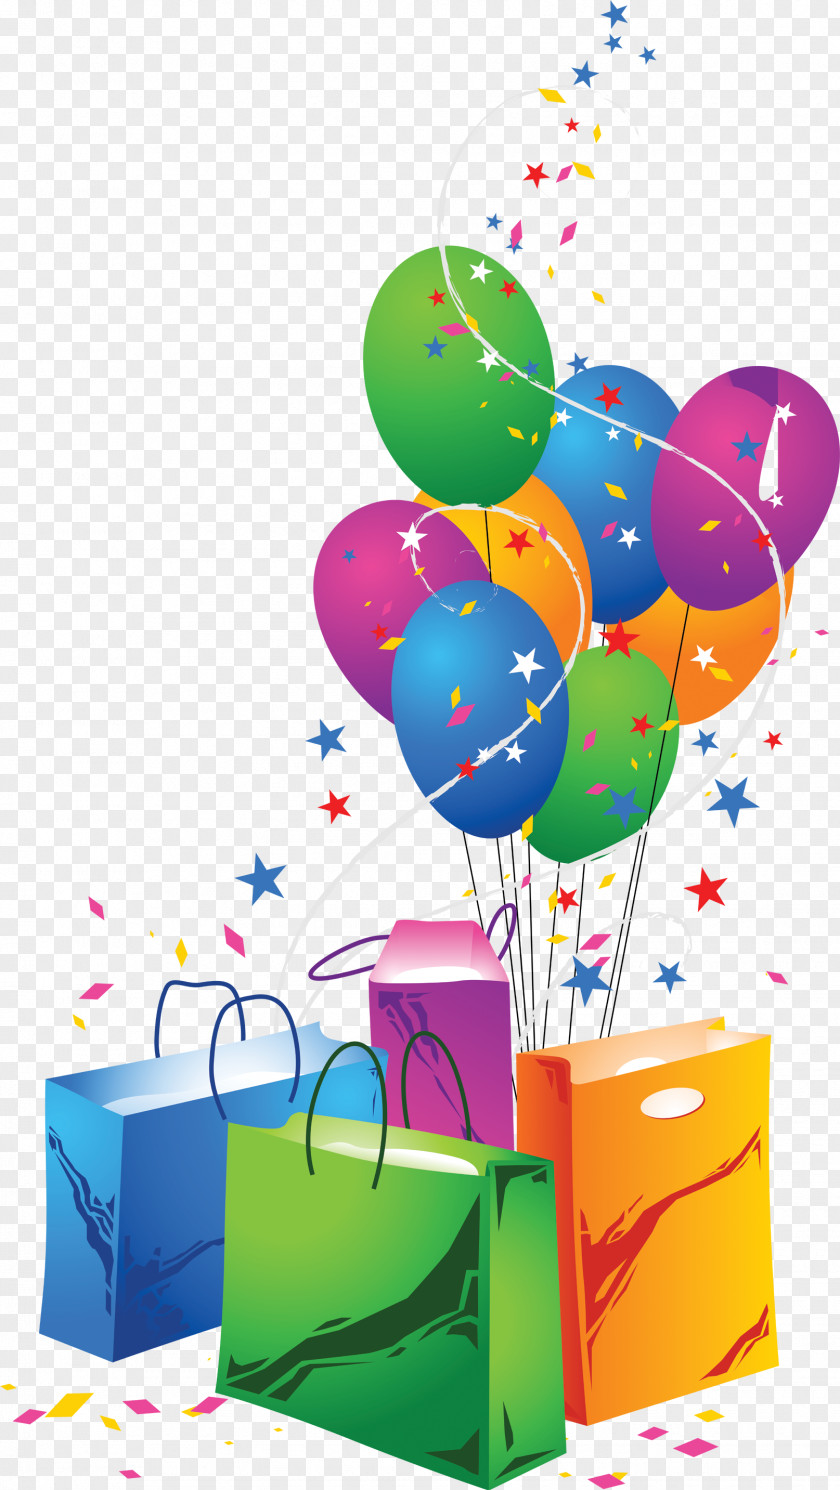 Celebrate Shopping Bags & Trolleys PNG